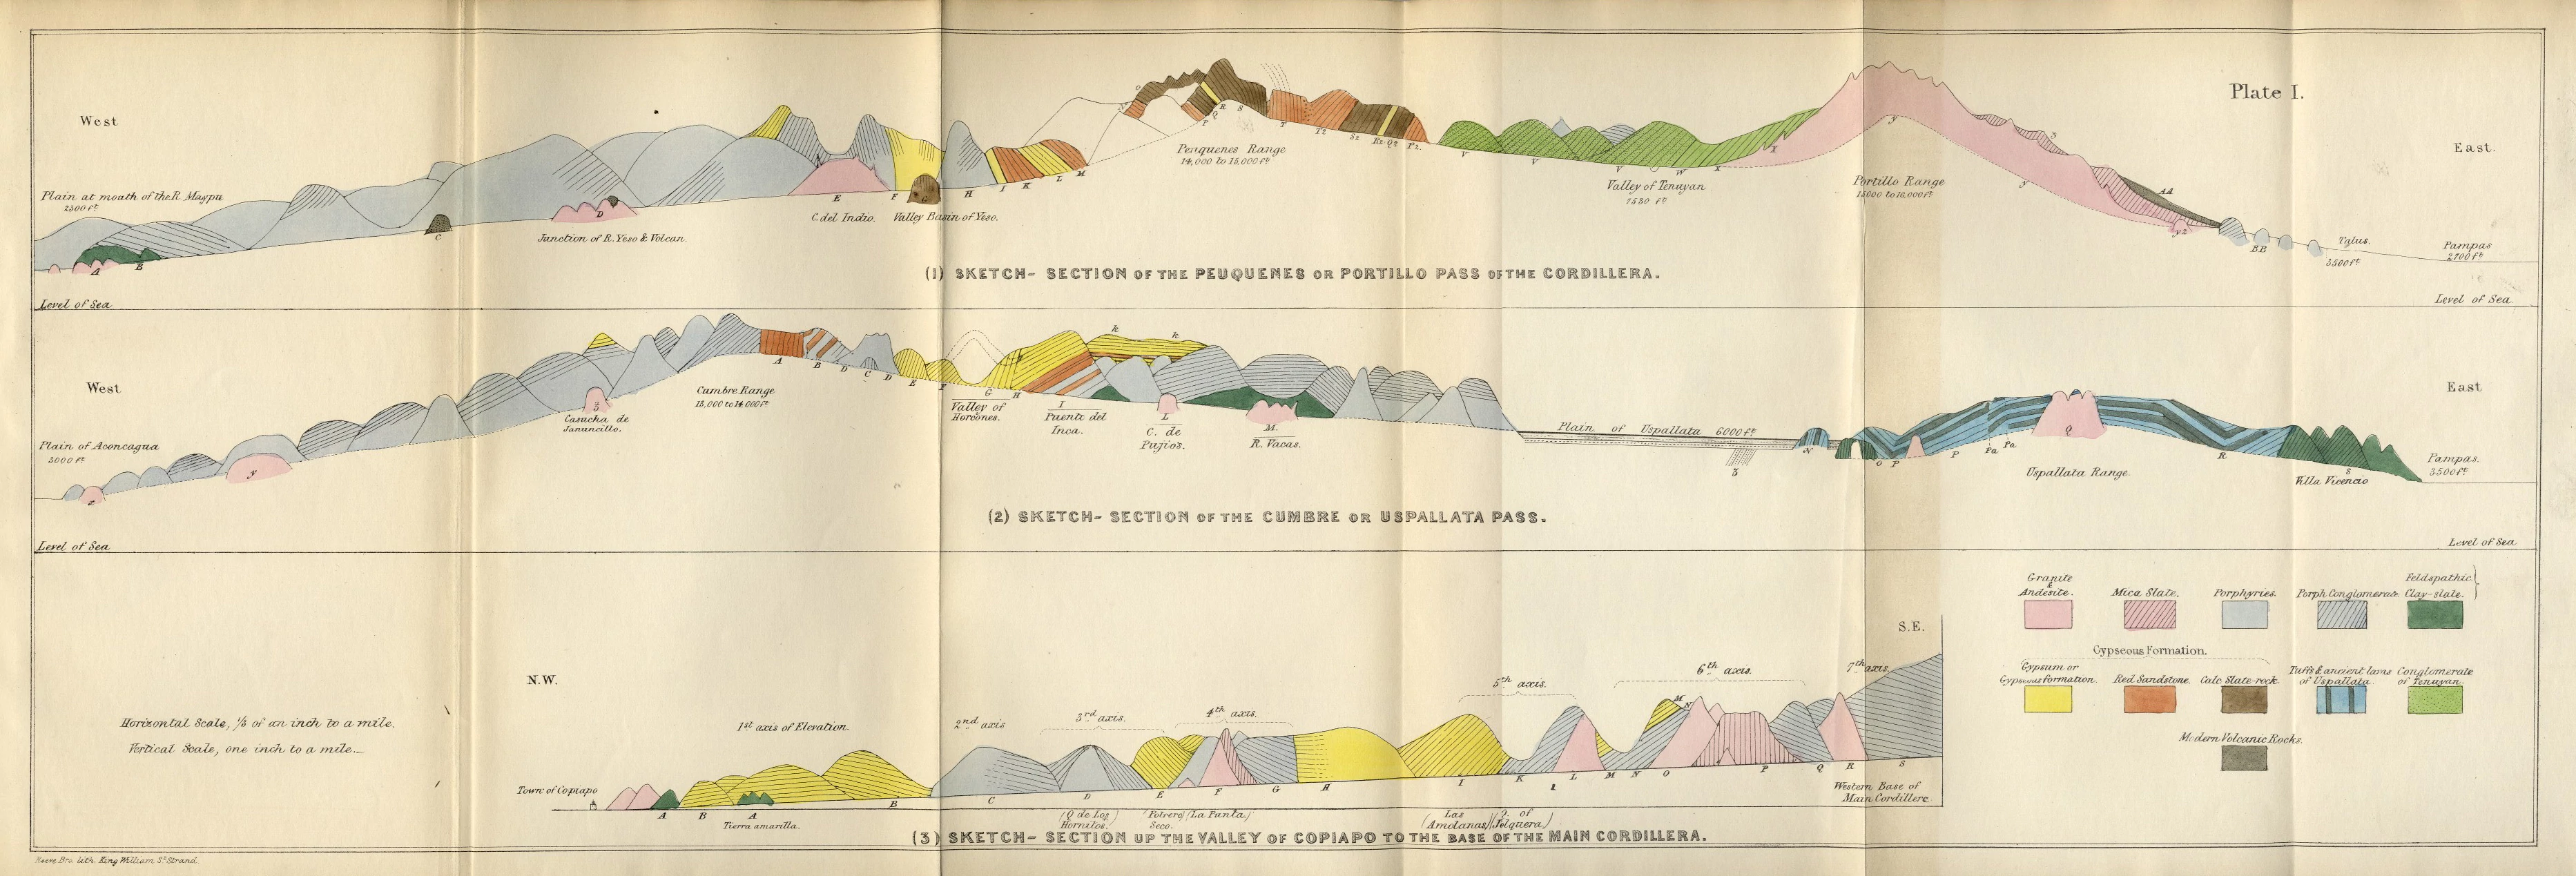 Geological observations on South America — Plate 1, Charles Darwin